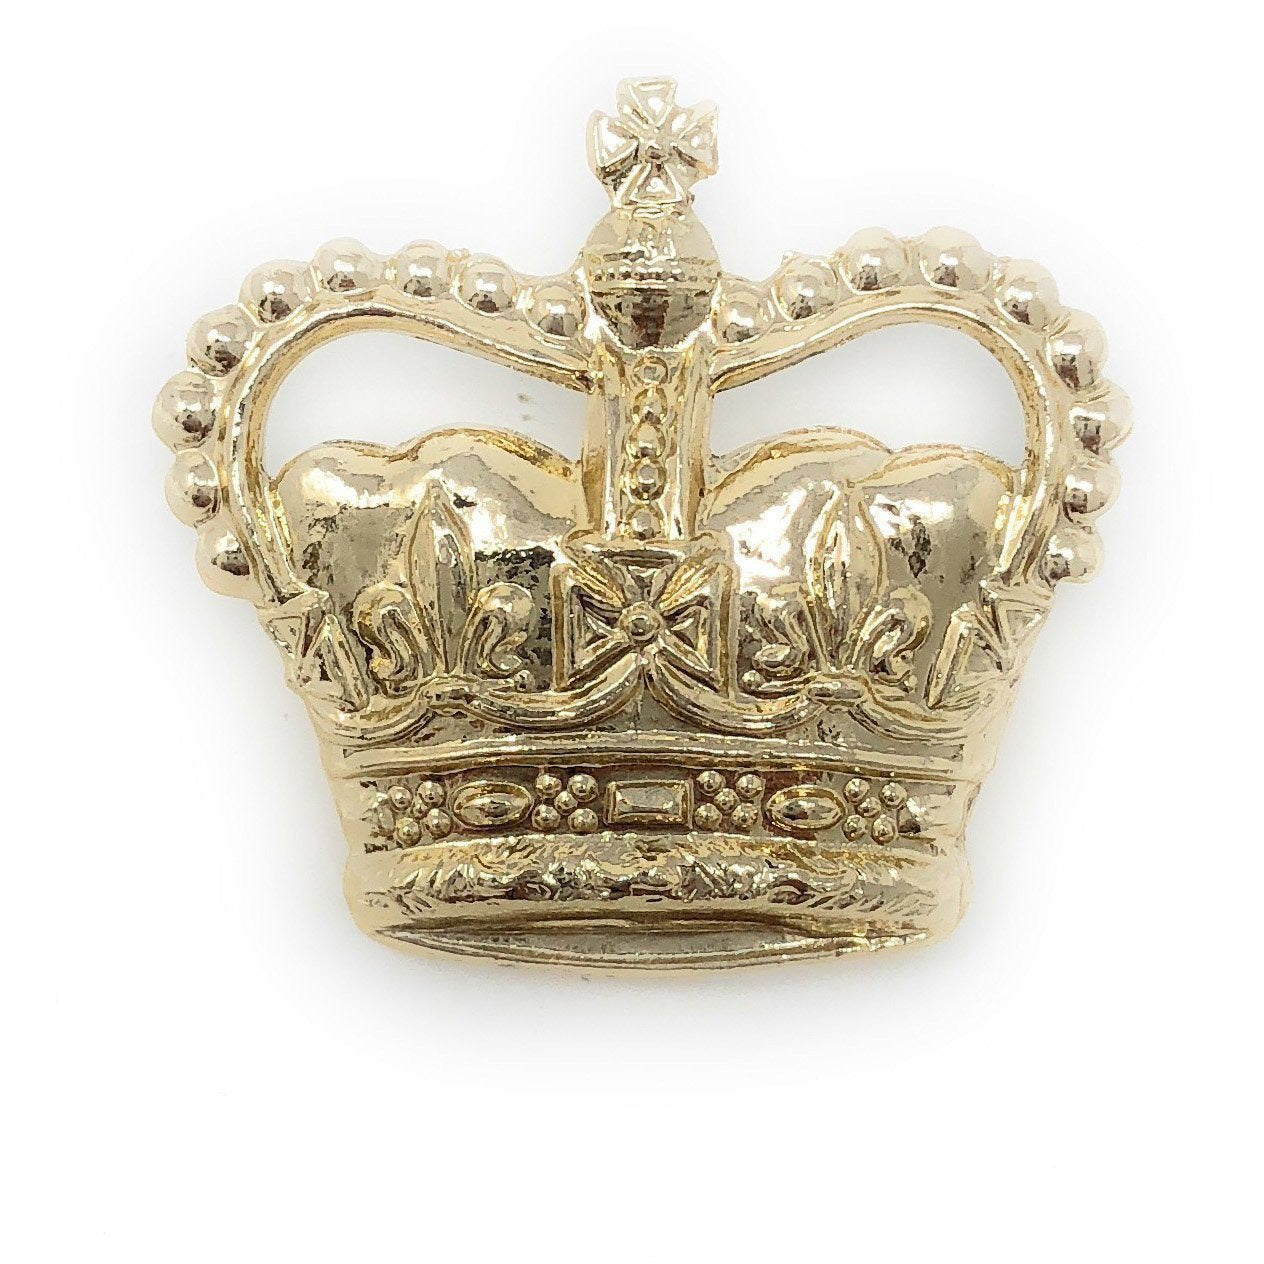 Eversleigh Crowns 3/4" - Anodised Gilt - Spike & Clutch Fitting | Official Cadet Kit Shop | Metal Badges of Rank & Appointment